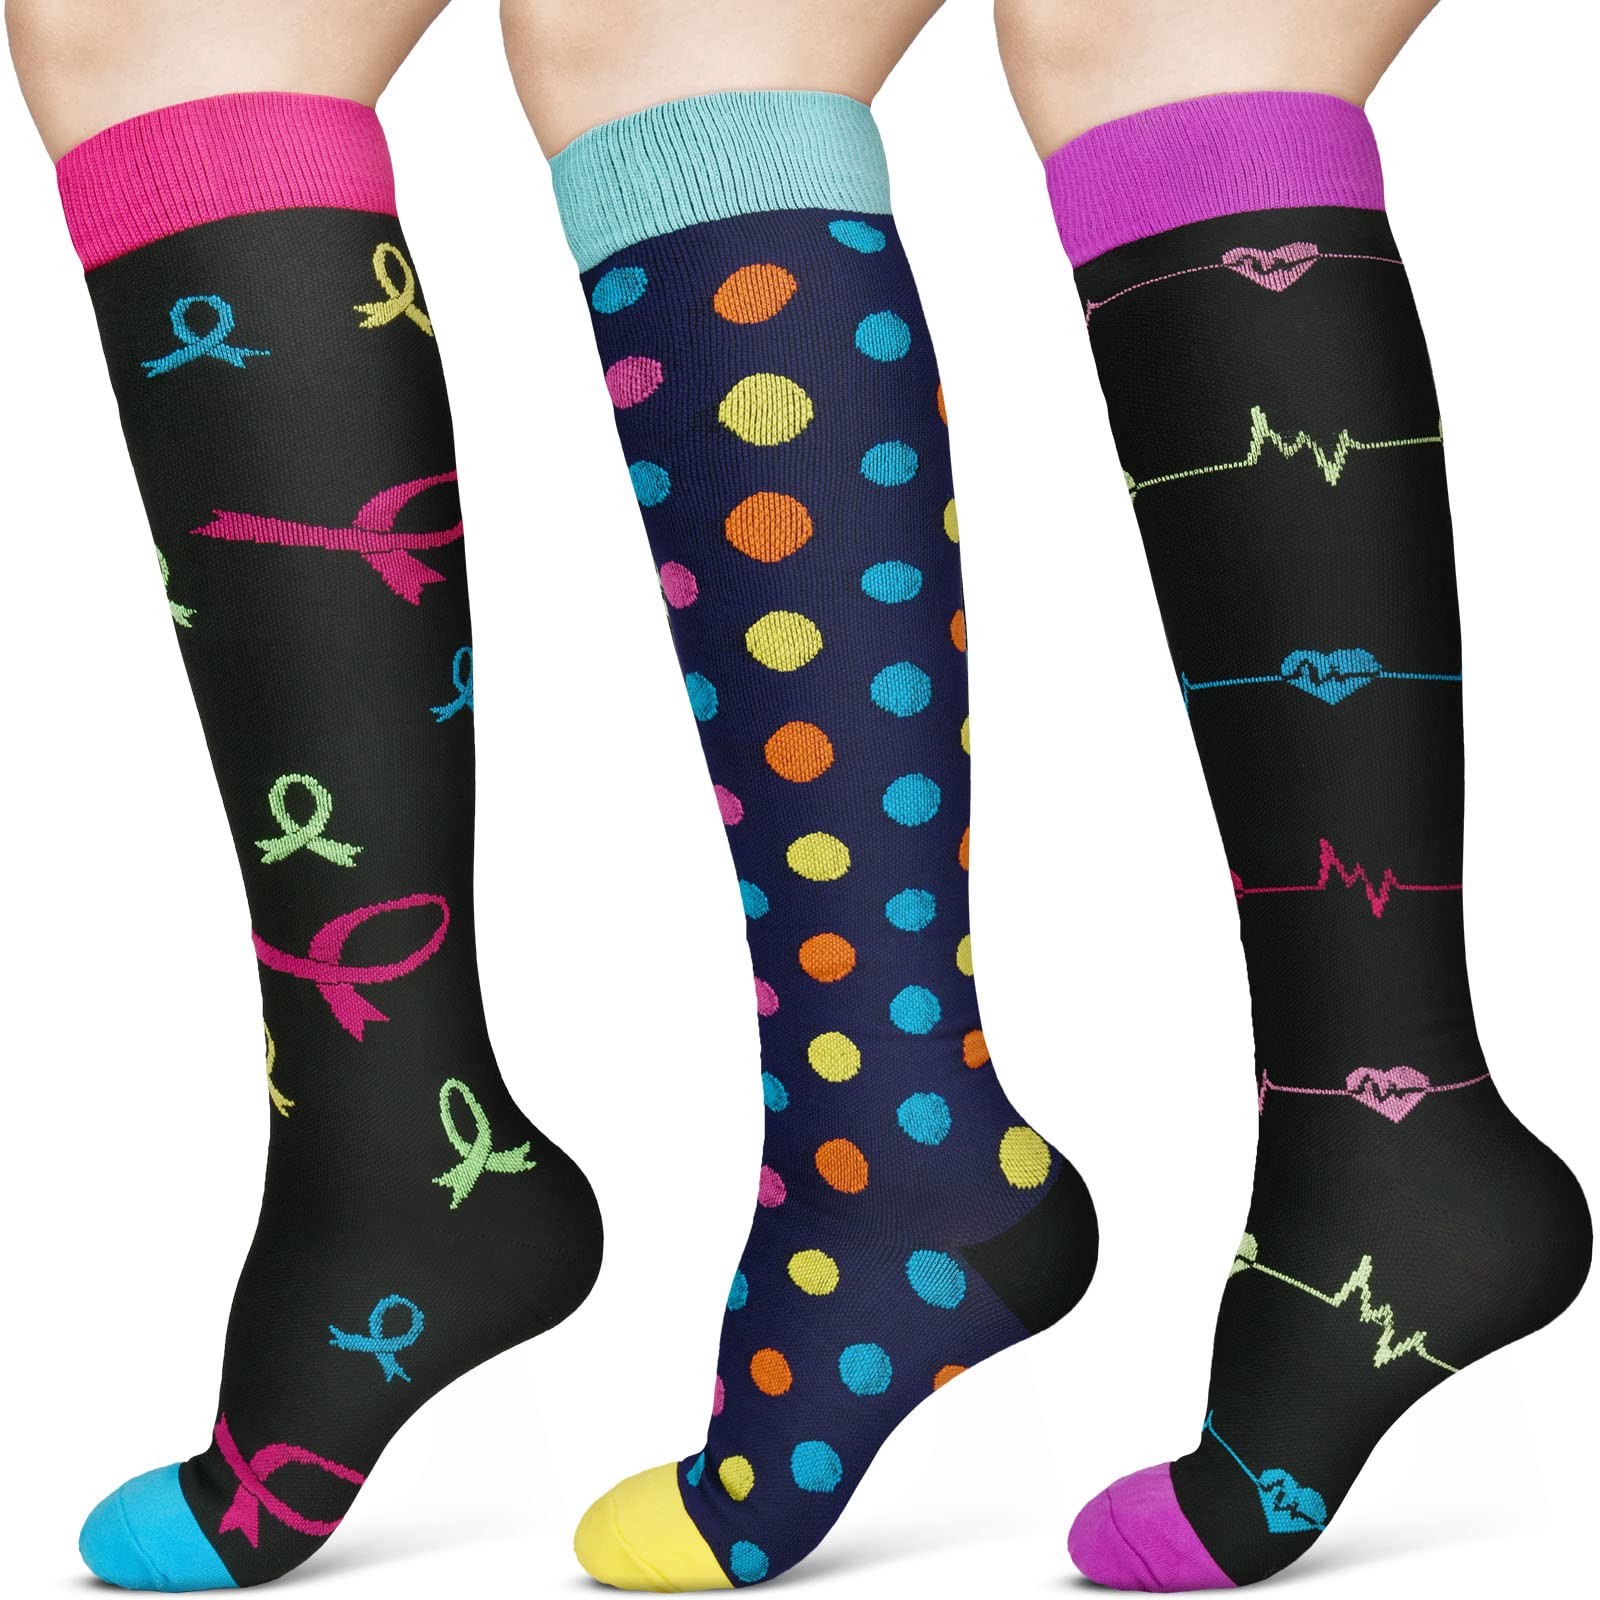 ACWOO Compression Socks for Women & Men 3 Pairs Colorful